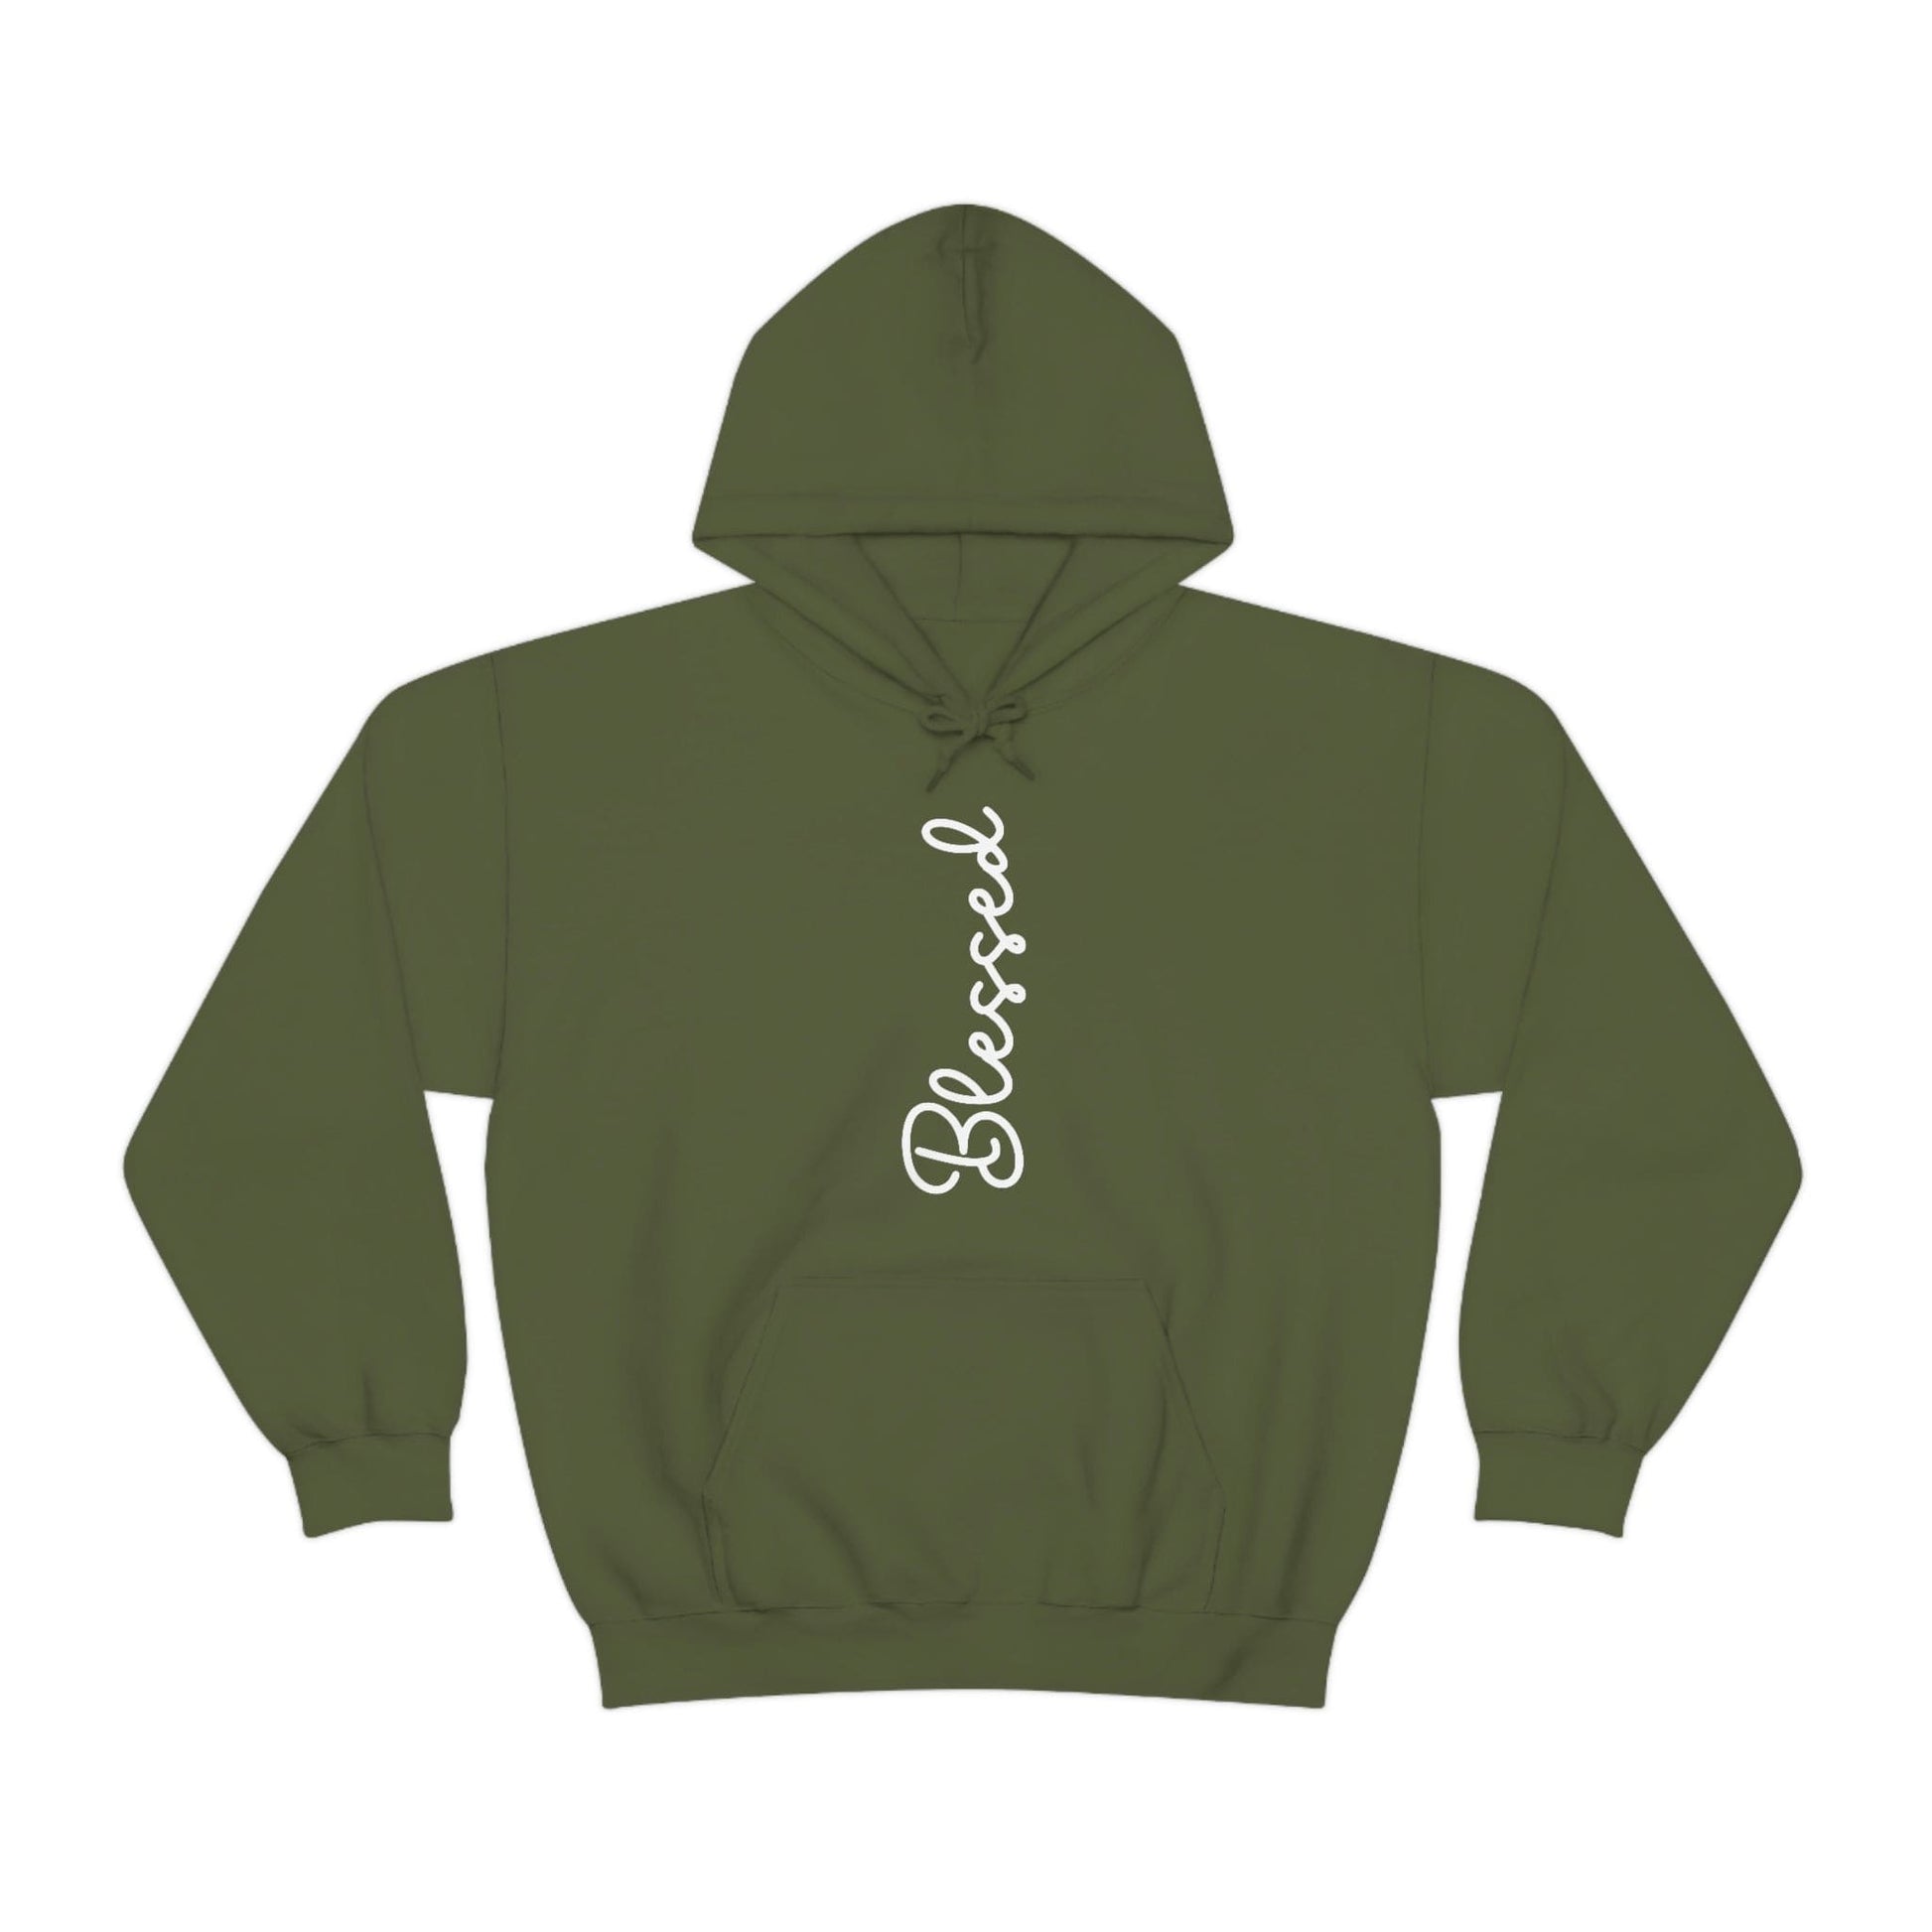 blessed hoodie, faith-based clothing, Christian apparel, inspirational clothing